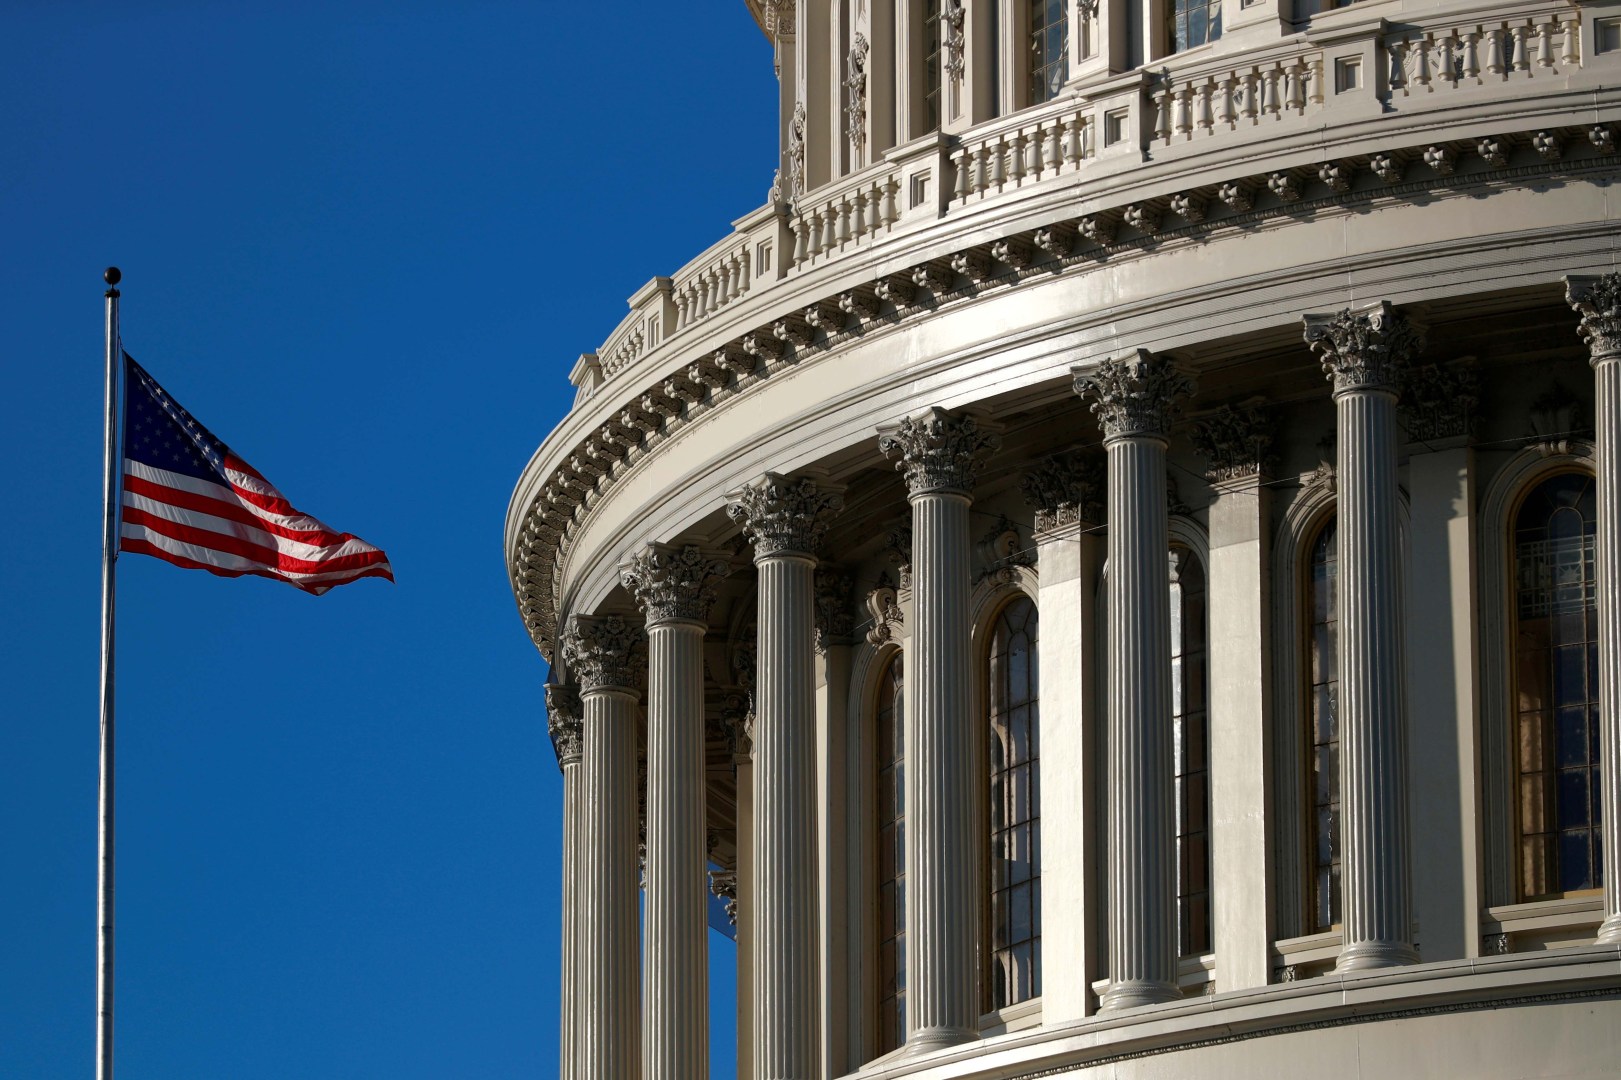 Two big votes on debt ceiling and infrastructure bills highlight a busy week in Washington.